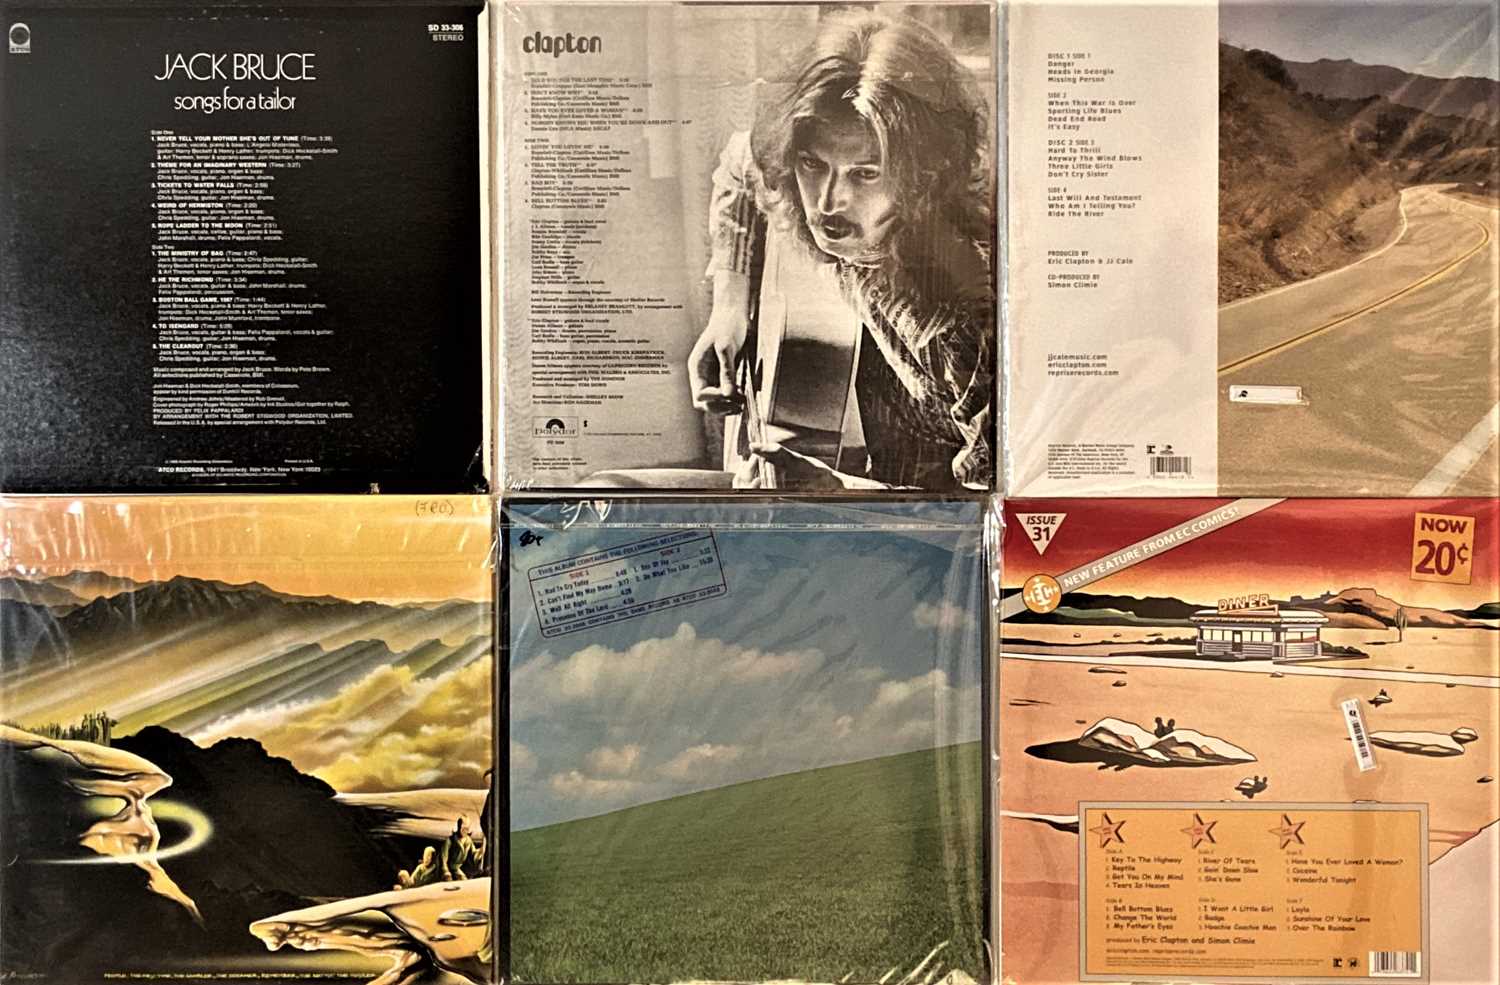 Cream Solo & Related - LPs - Image 2 of 2